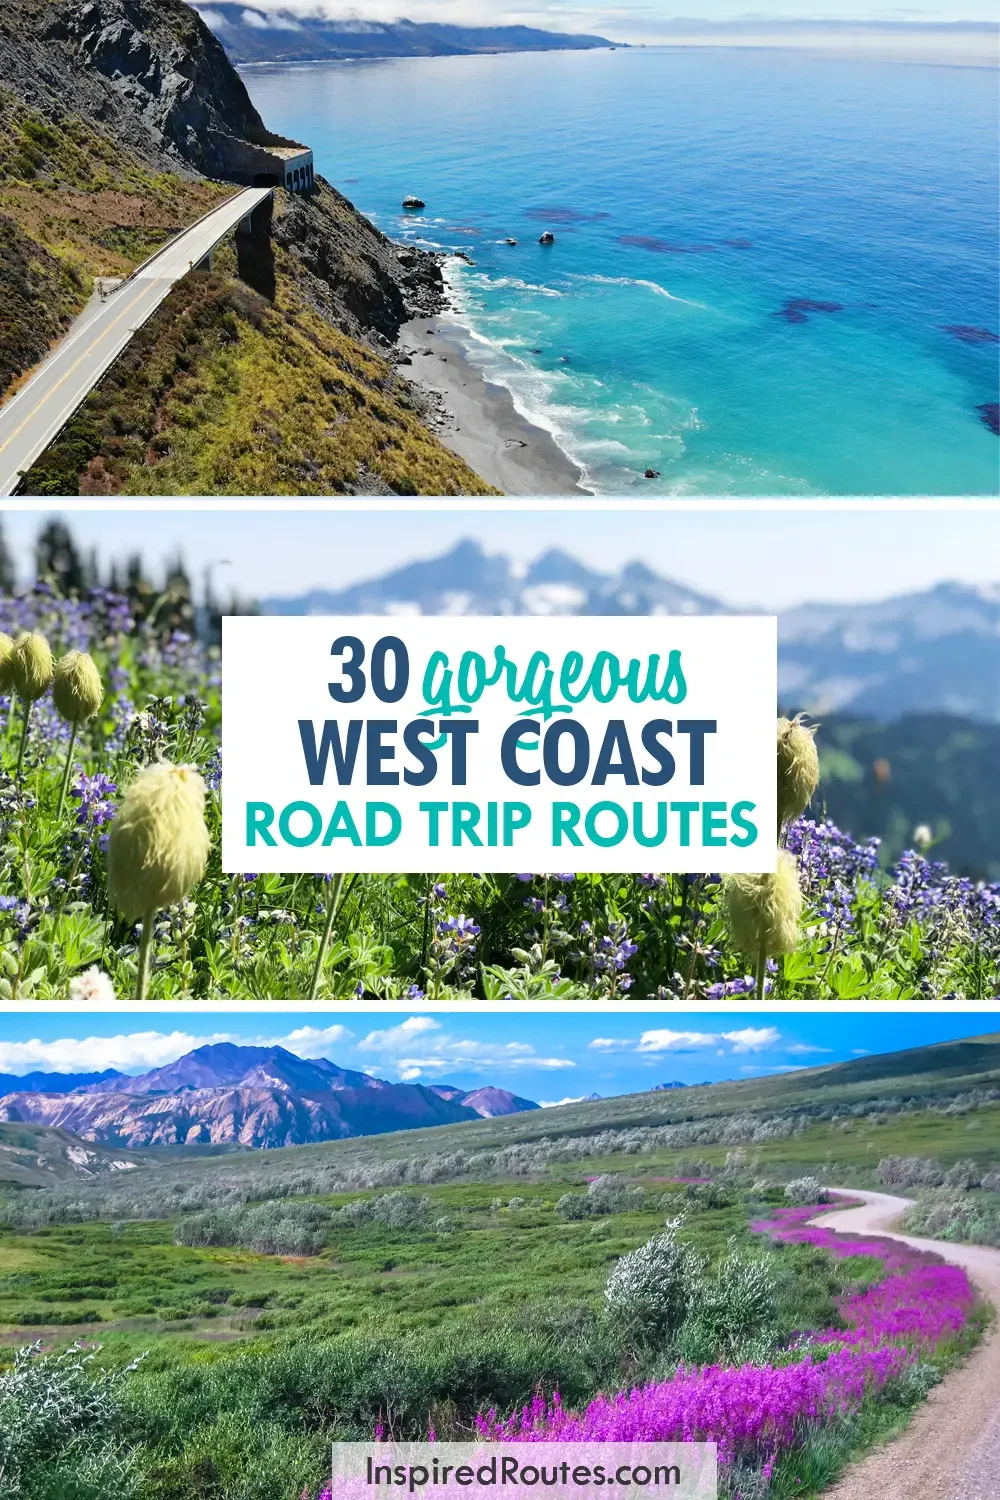 30 gorgeous west coast road trip routes with road trip images coast wild flowers and mountains